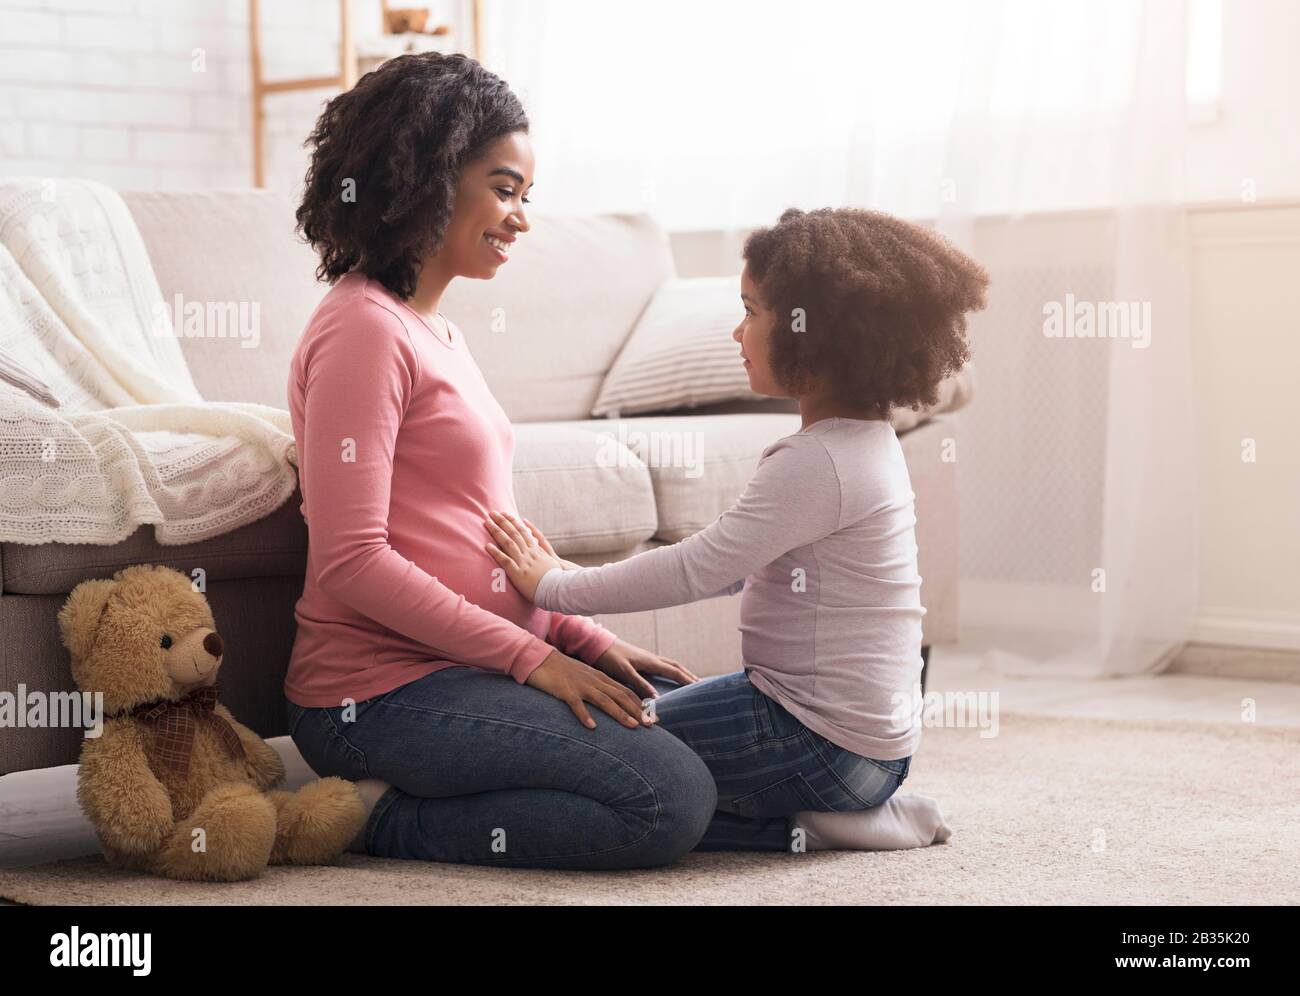 Little daughter touching pregnant mom's belly while playing together at home Stock Photo